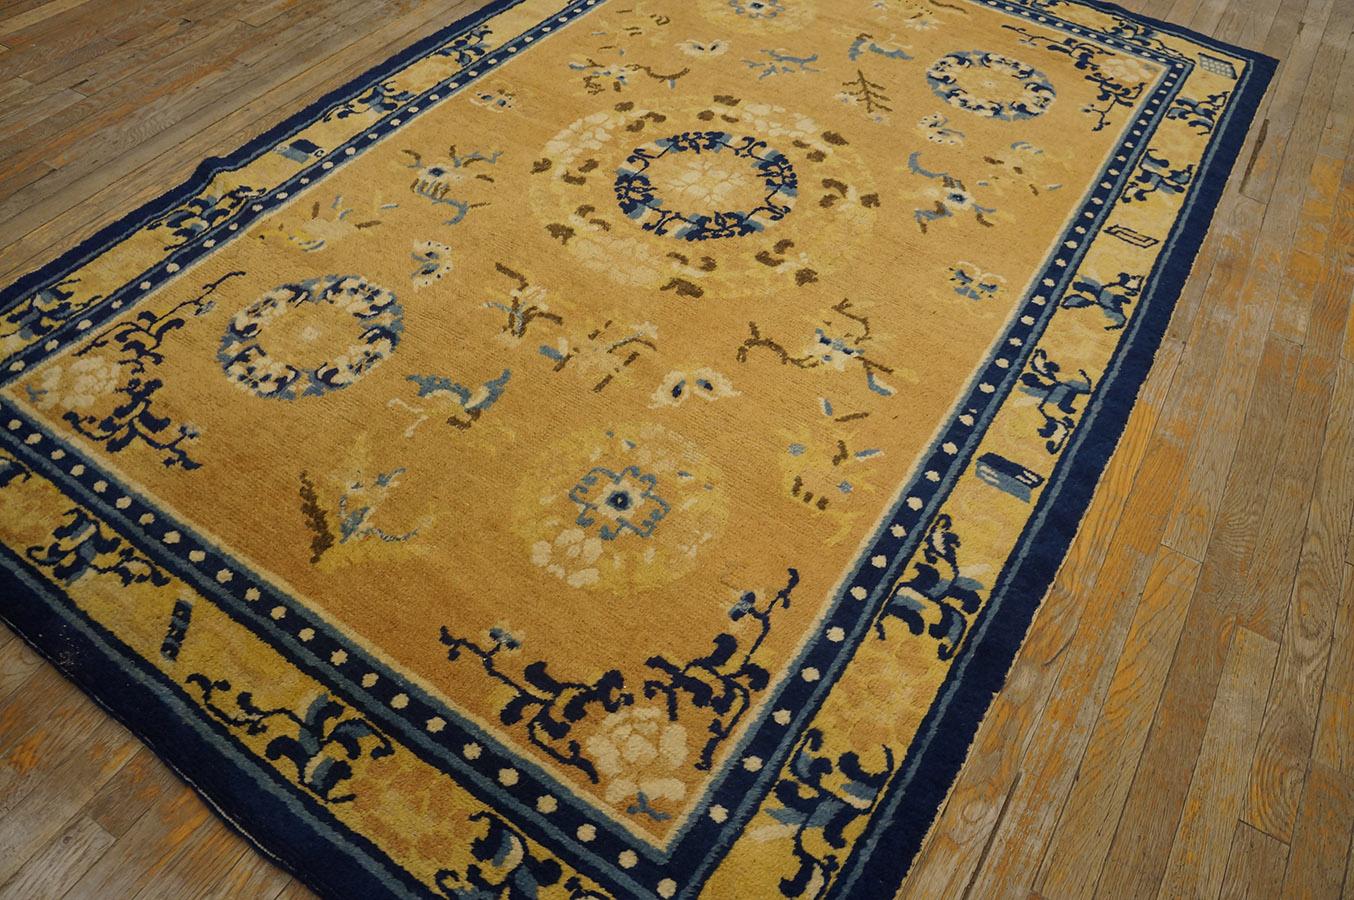 Late 18th Century Chinese Ningxia Carpet ( 5' x 8' 1'' - 152 x 246 cm ) For Sale 3